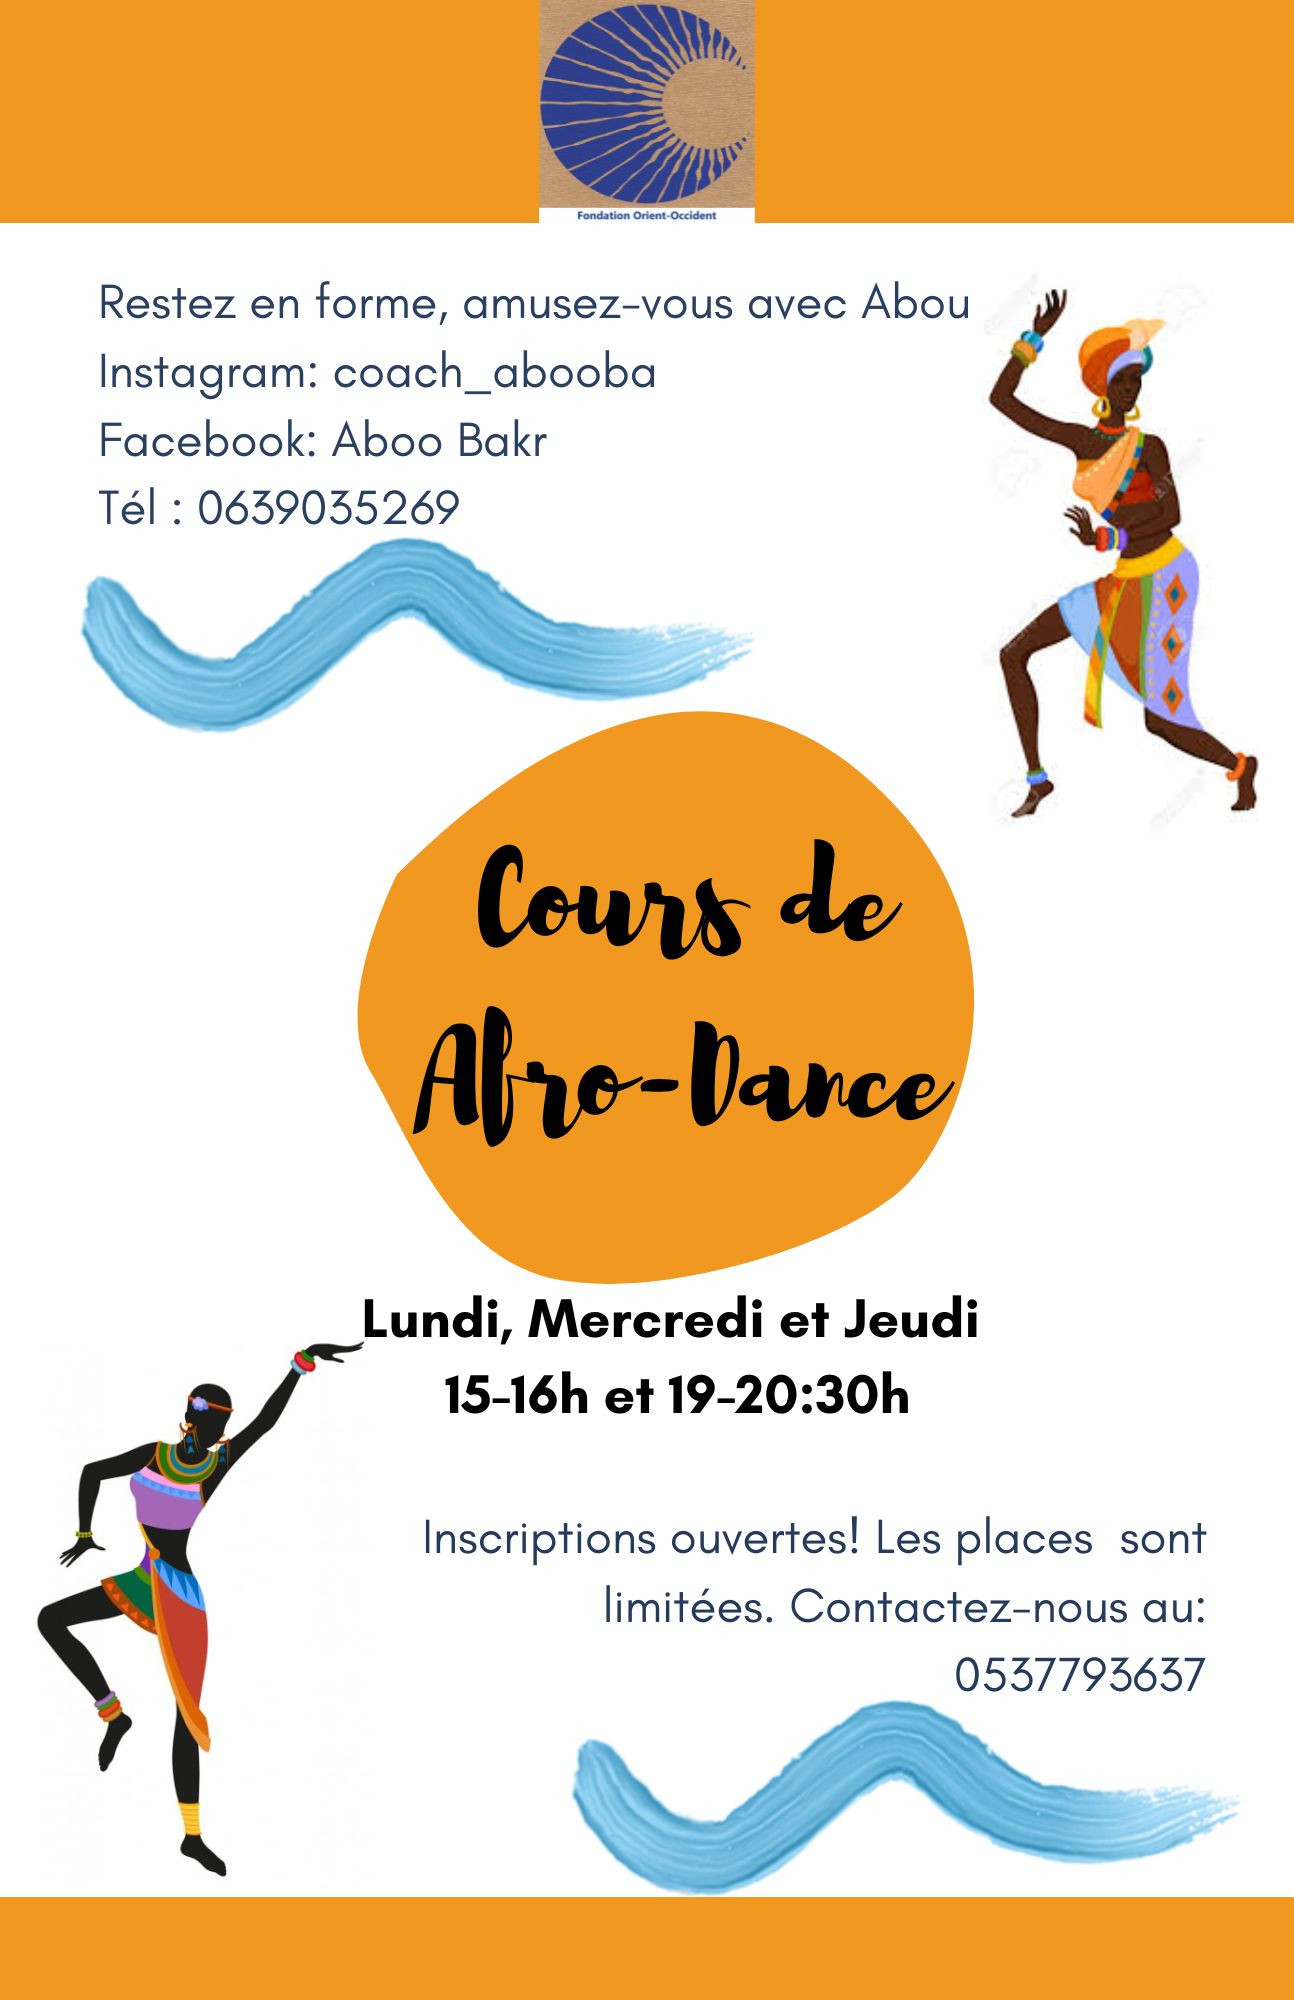 Afro dance course